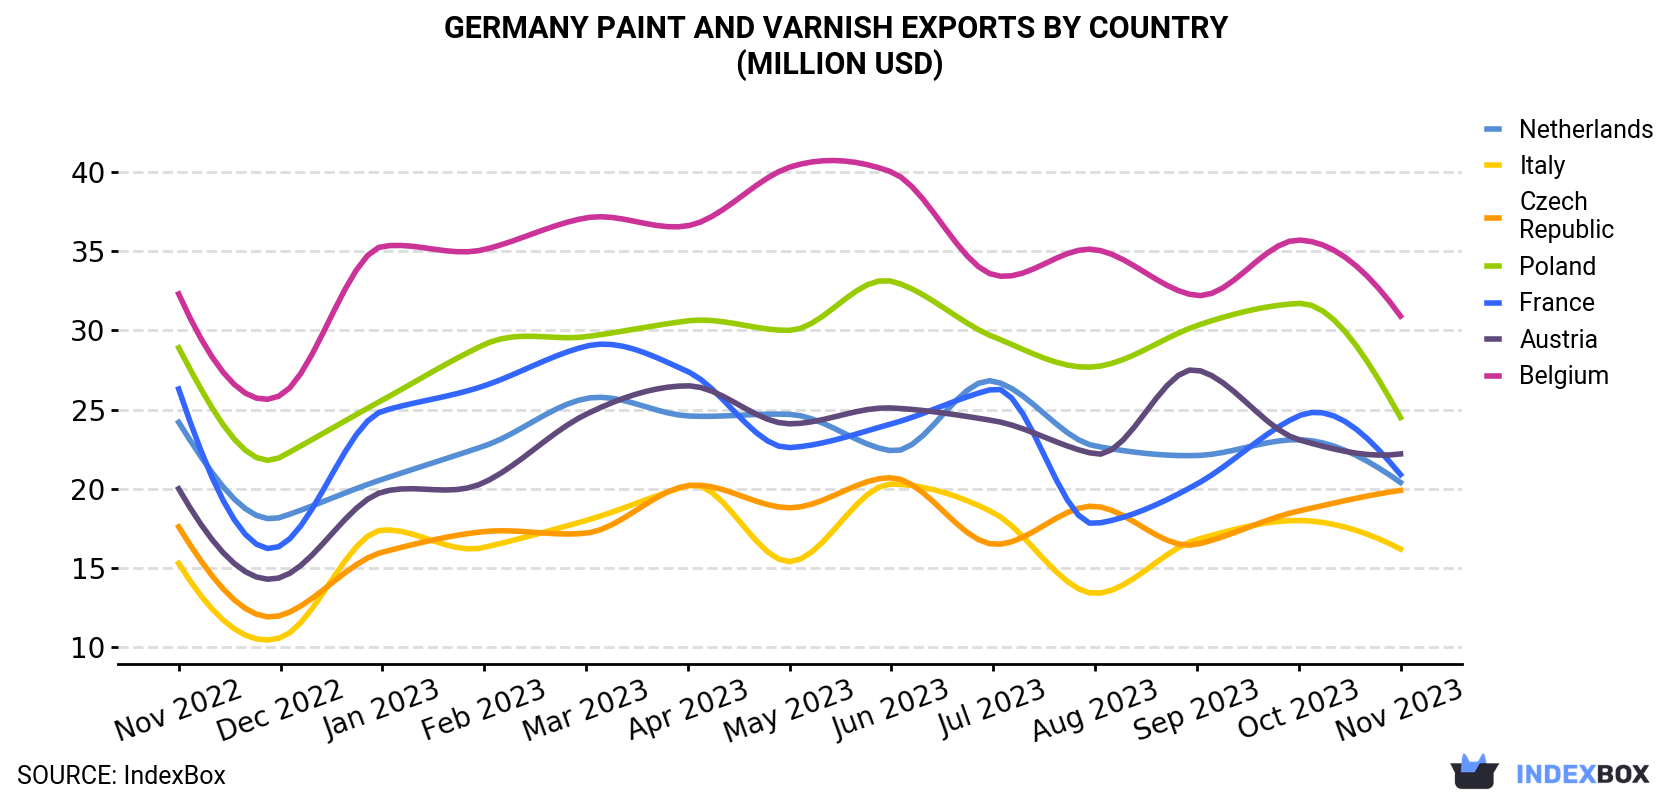 Germany Paint and Varnish Exports By Country (Million USD)